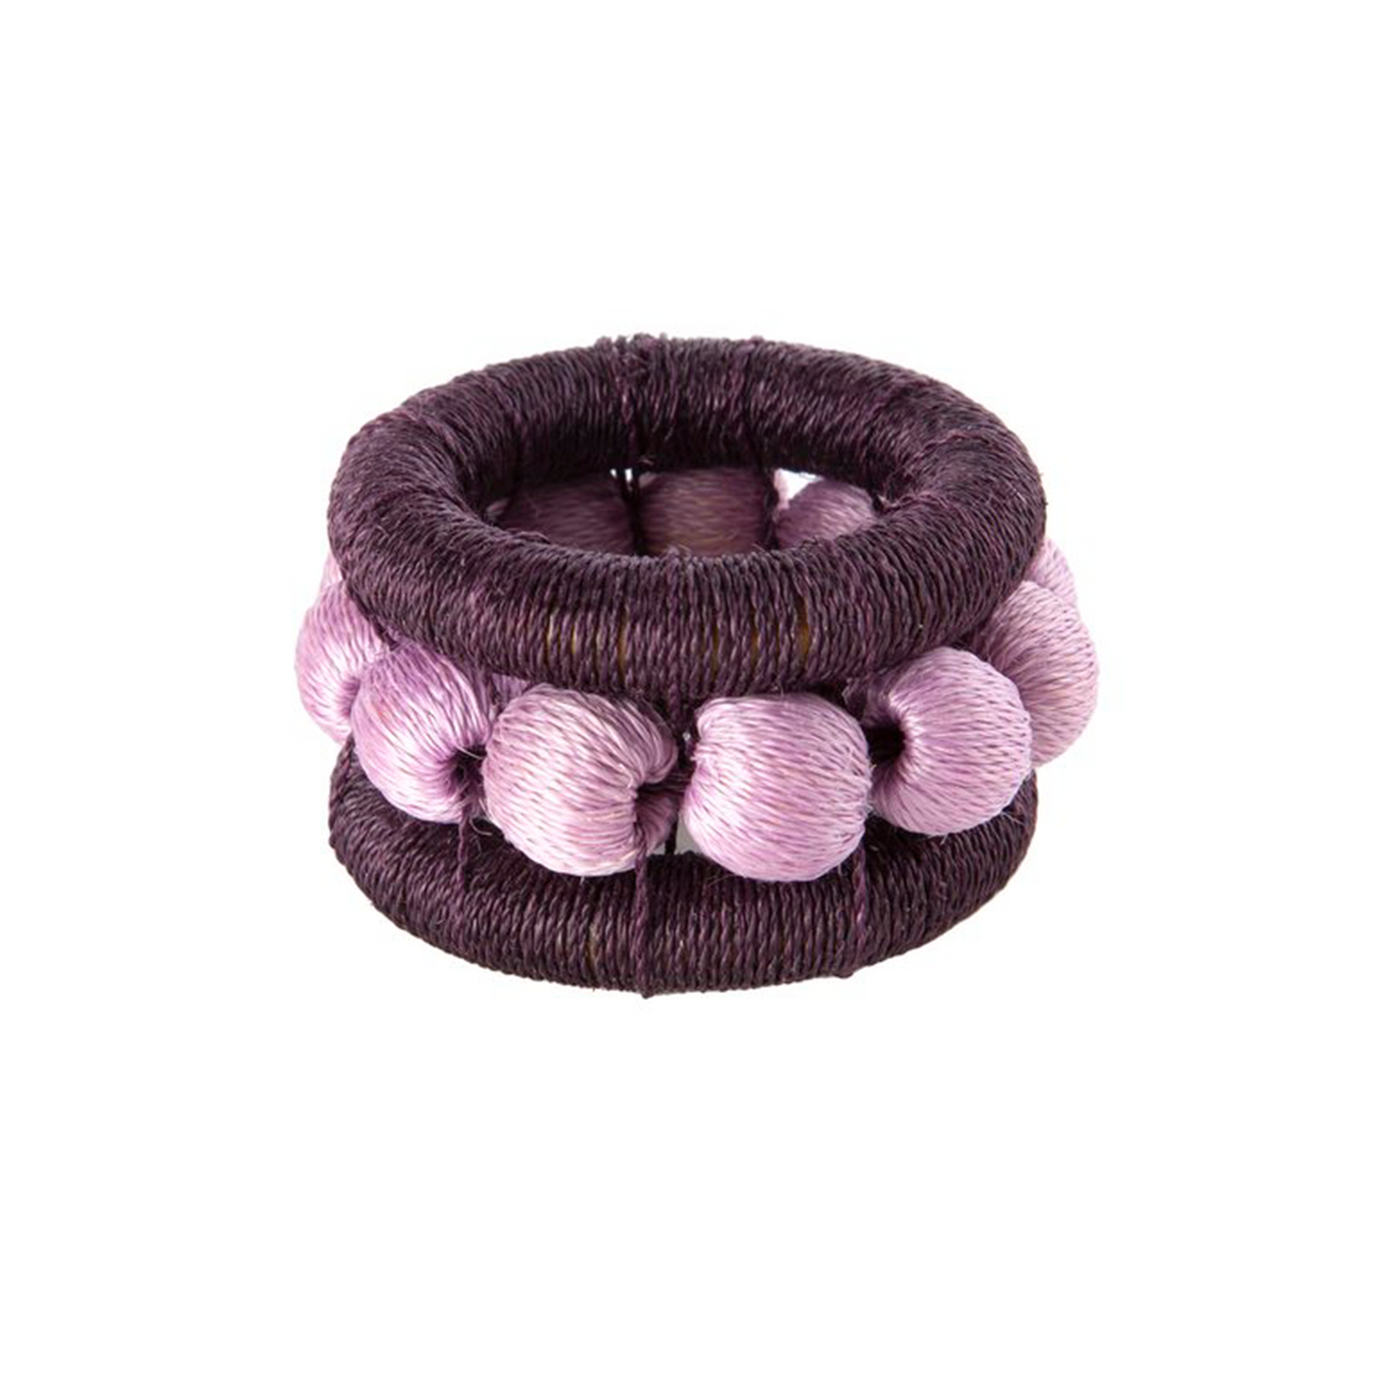 Berry Napkin Ring - Eggplant and Orchid (Individual)